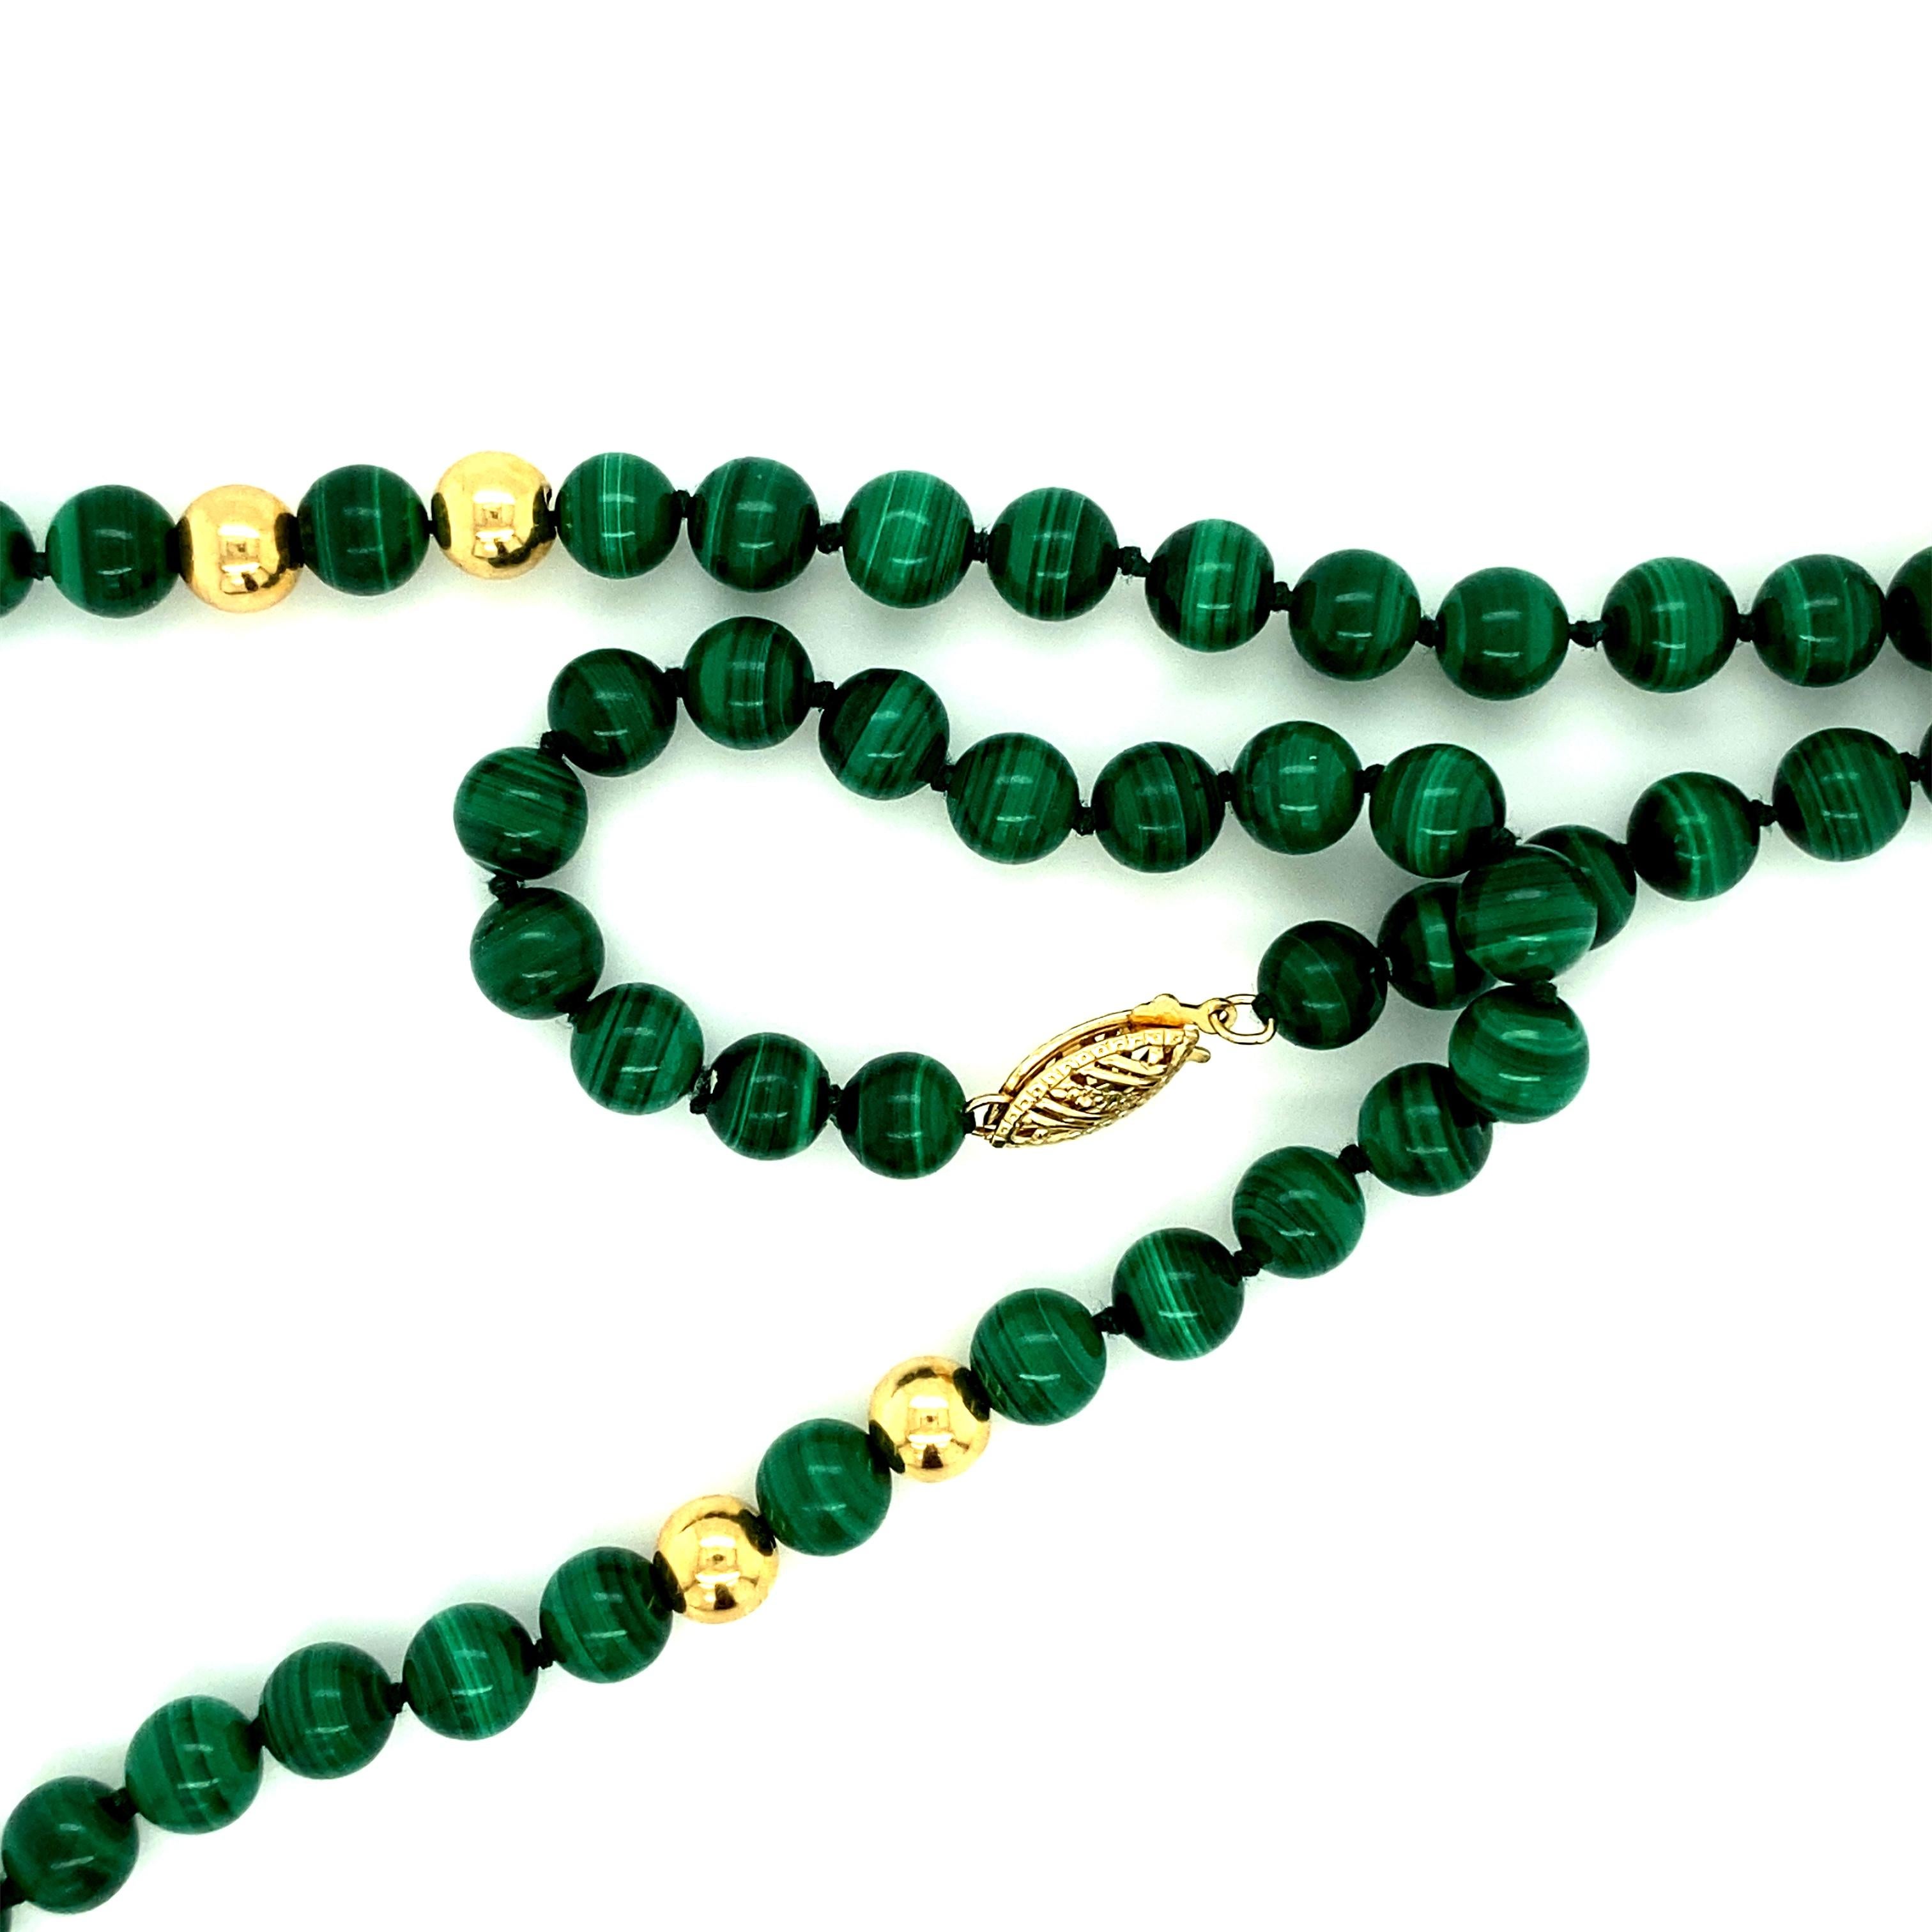 Vintage Jade carved with flowers & fish, 2” x 3/4”. 
Incredible craftsmanship. Chain is Malachite bead necklace 6.25 mm adorned with 14kt gold closure & beads. 
Weight: 65.1 gr
Size: 24”